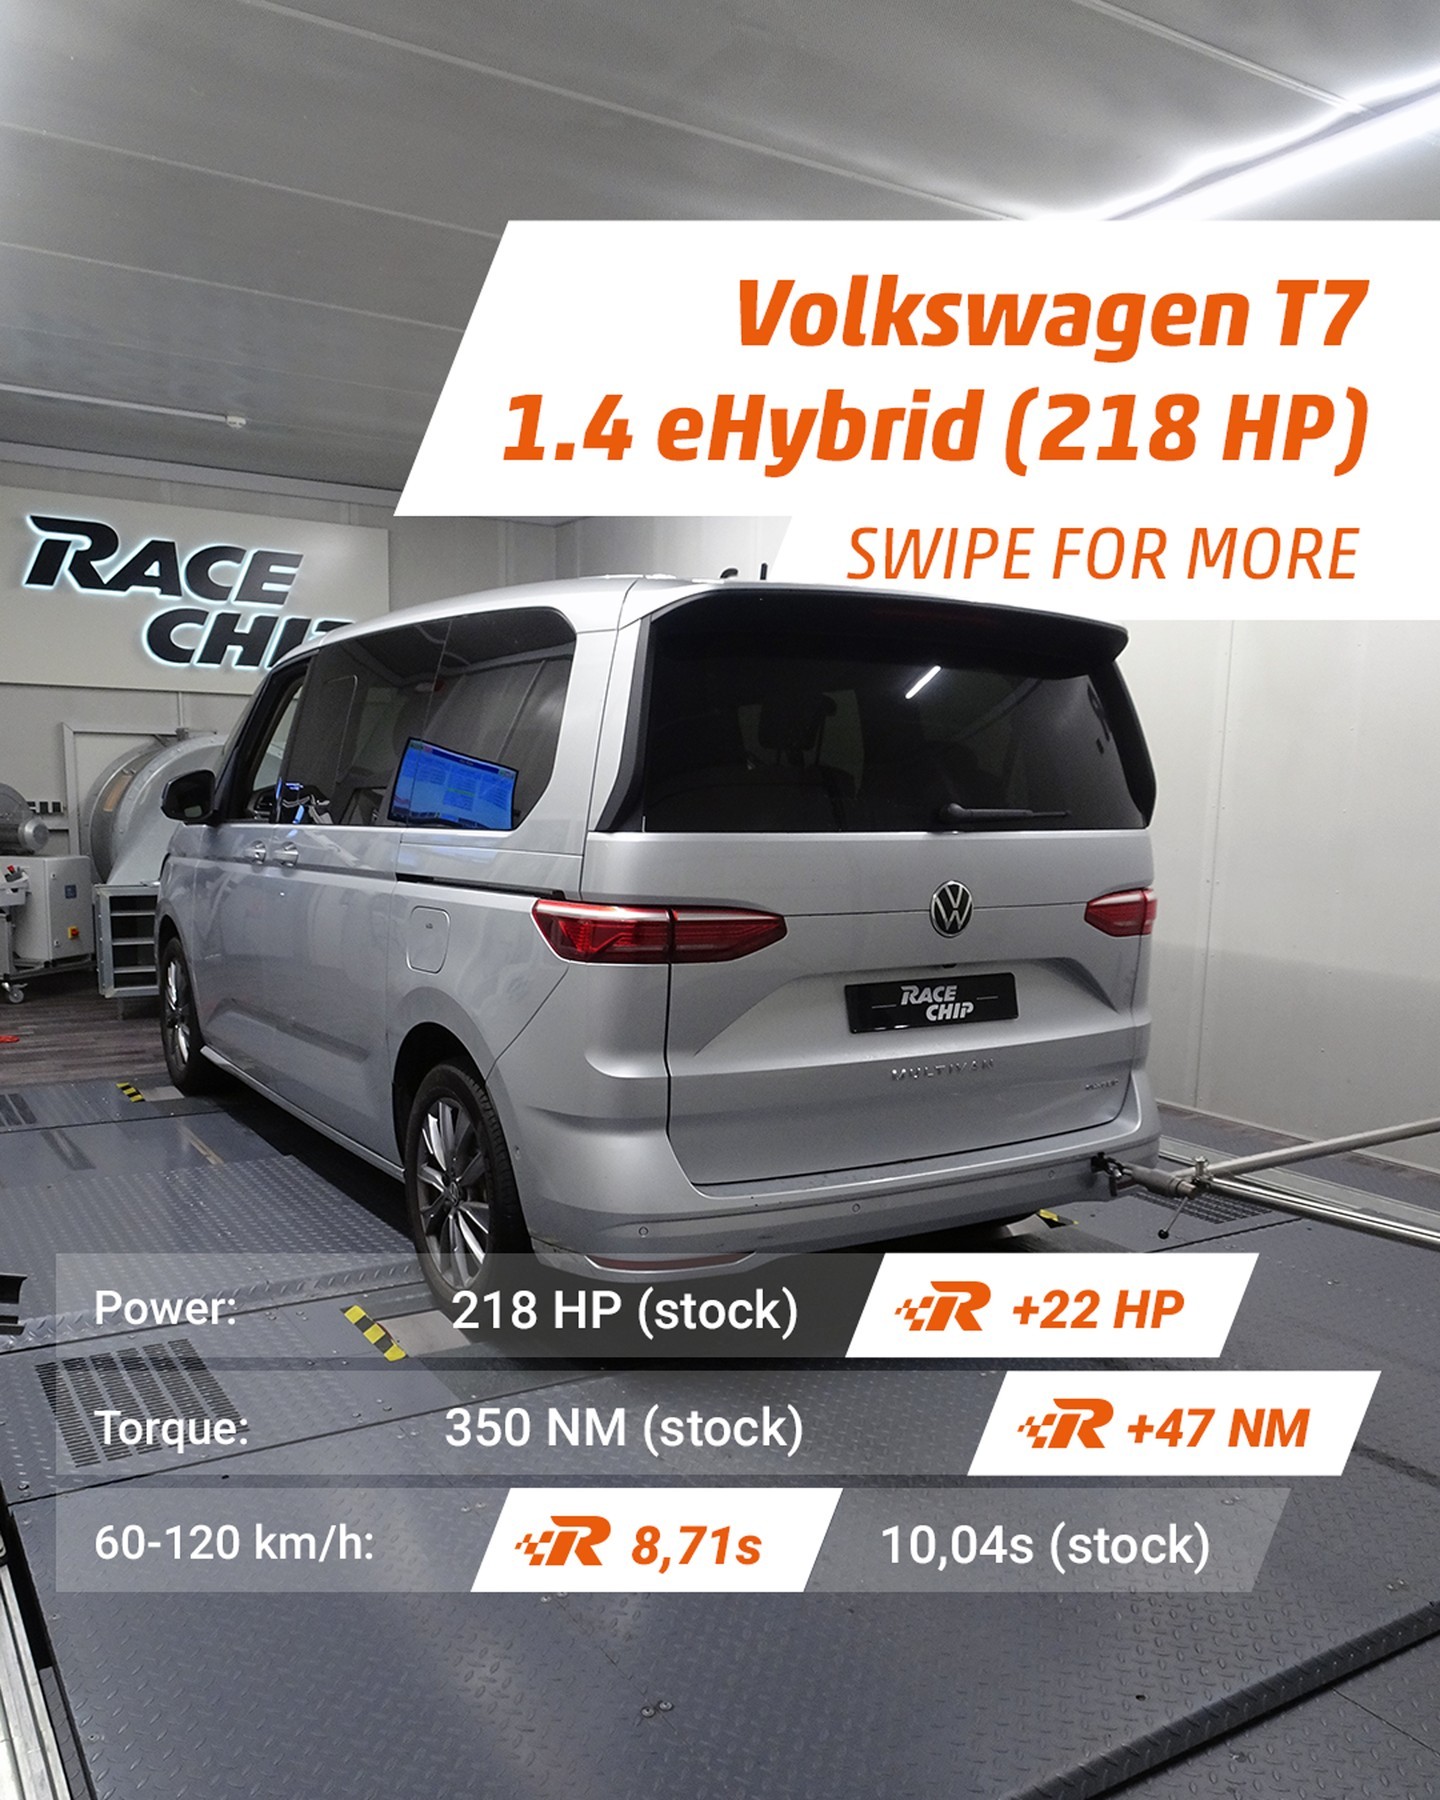 VW T6.1 Multivan Chip Tuning – Can a family car be actually fast?